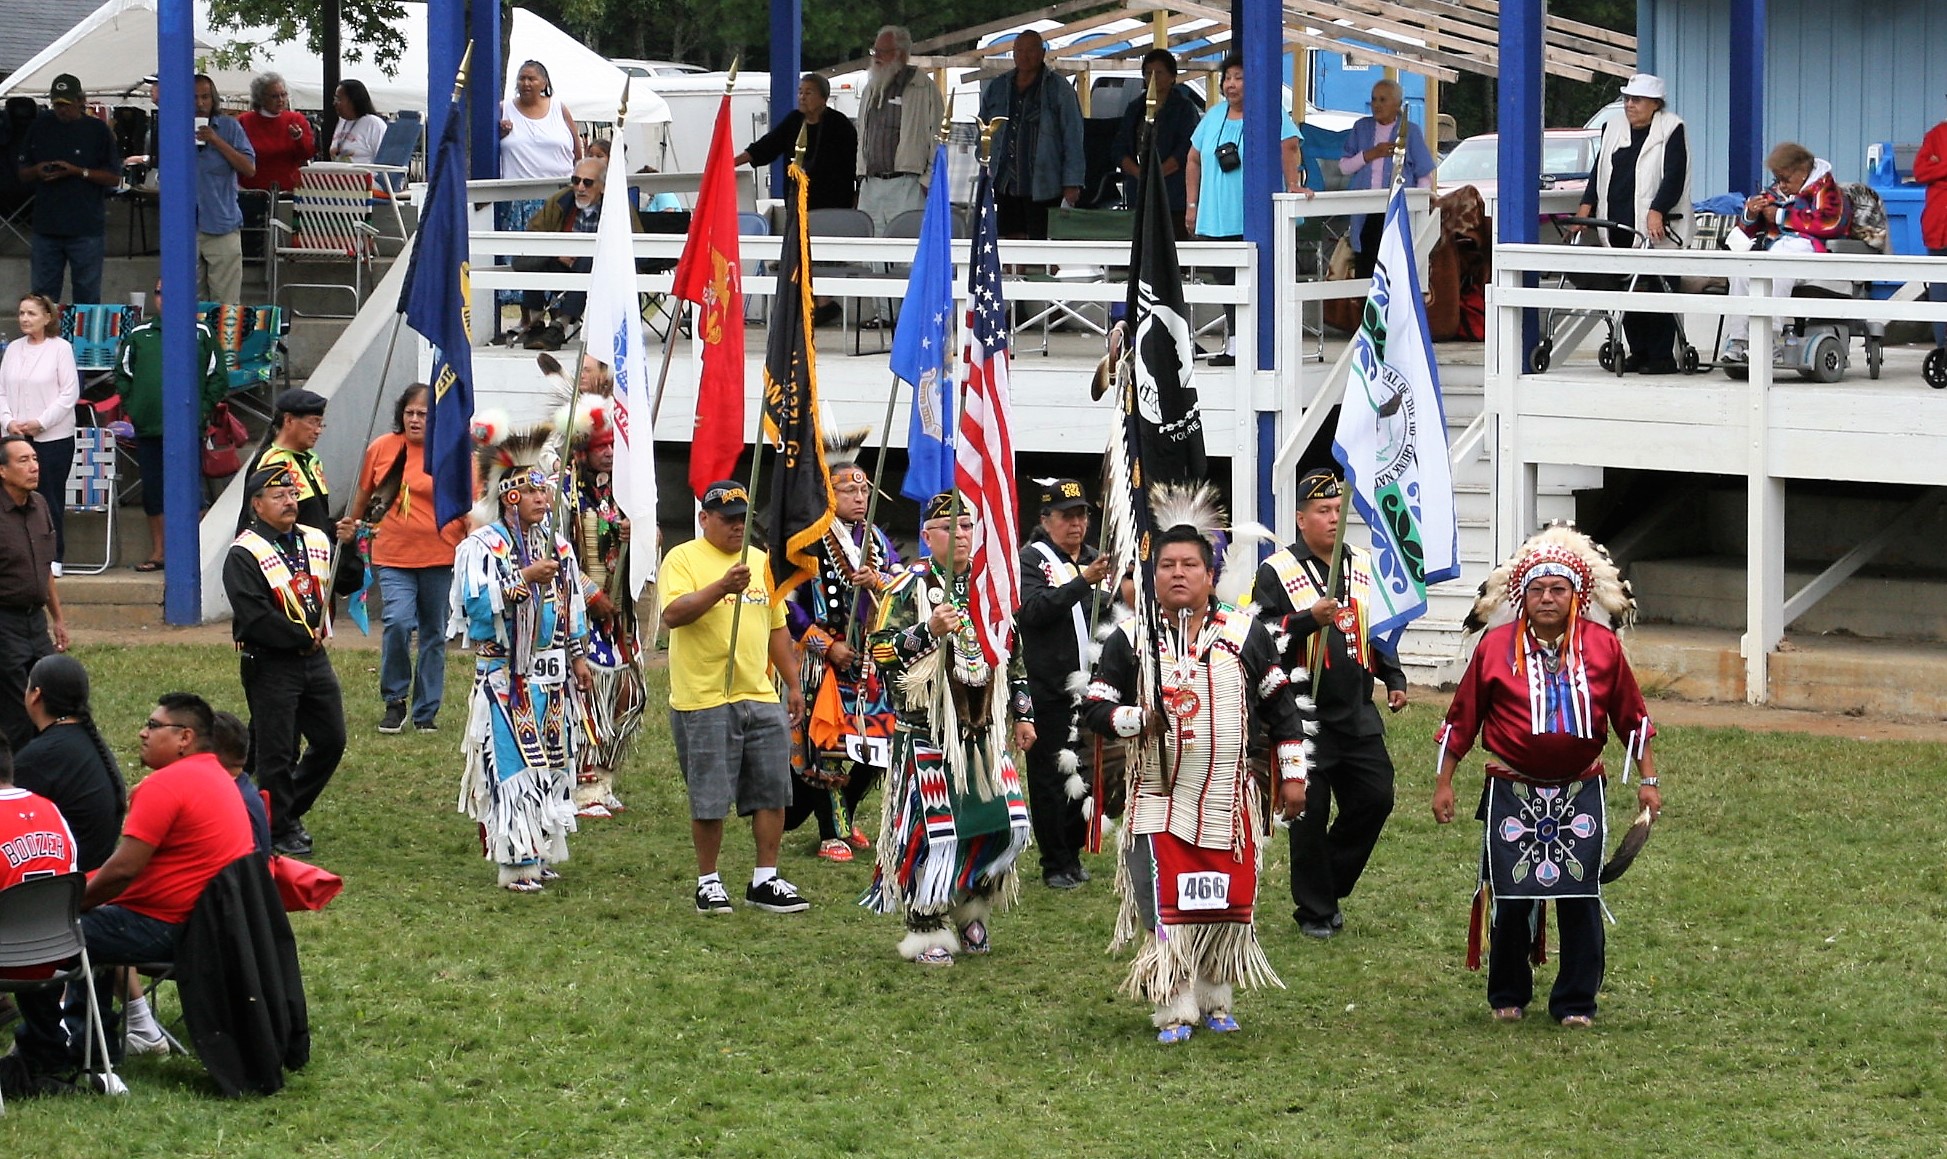 Grand entry at the powwow